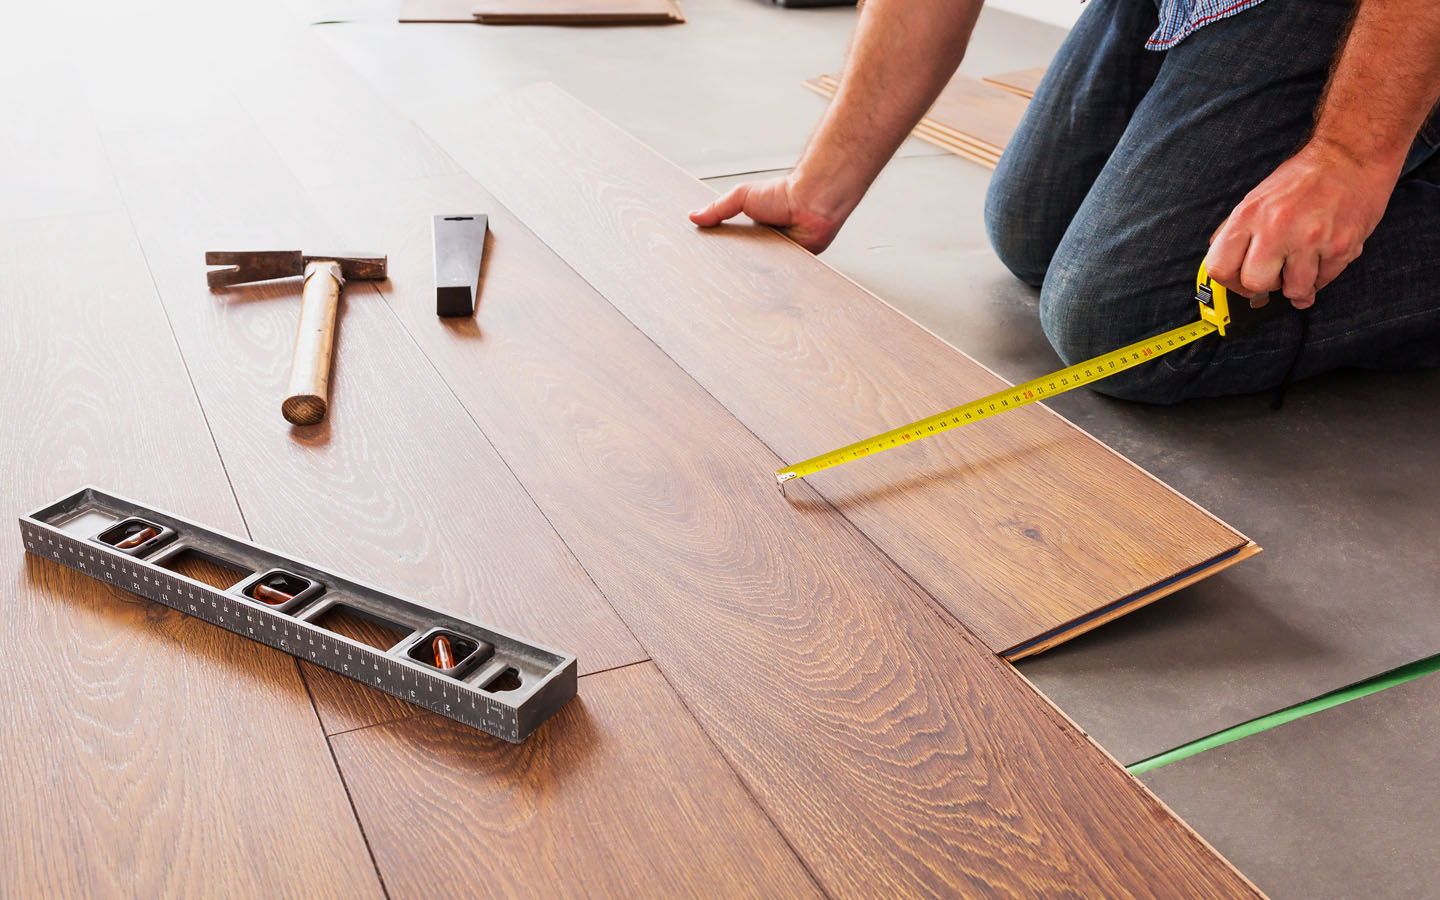 How To Remove Scratches From Laminate Wood Floor